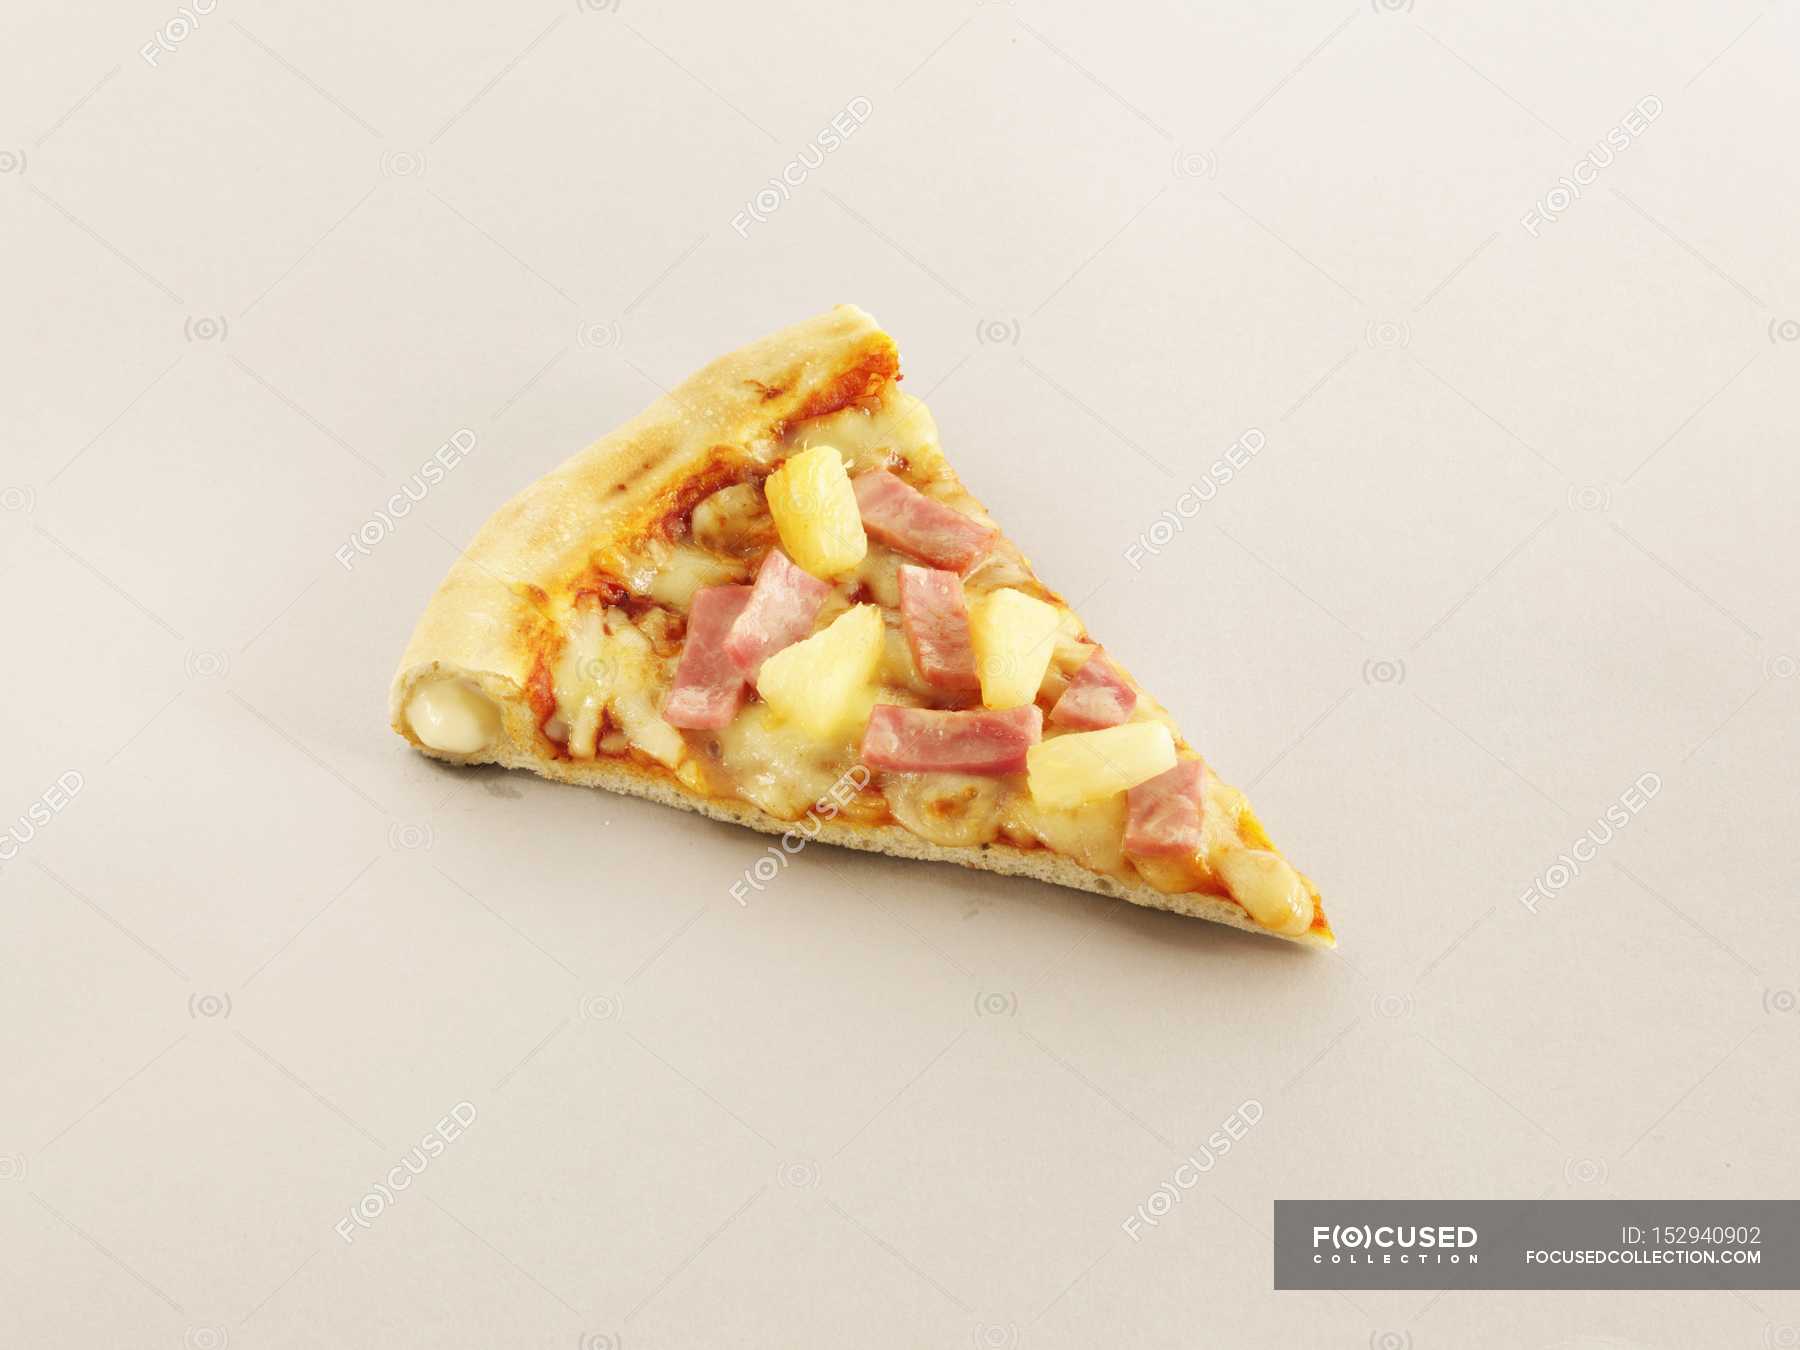 laver mad Korrespondance Mediator Slice of crust ham and pineapple pizza — Ready To Eat, edible - Stock Photo  | #152940902